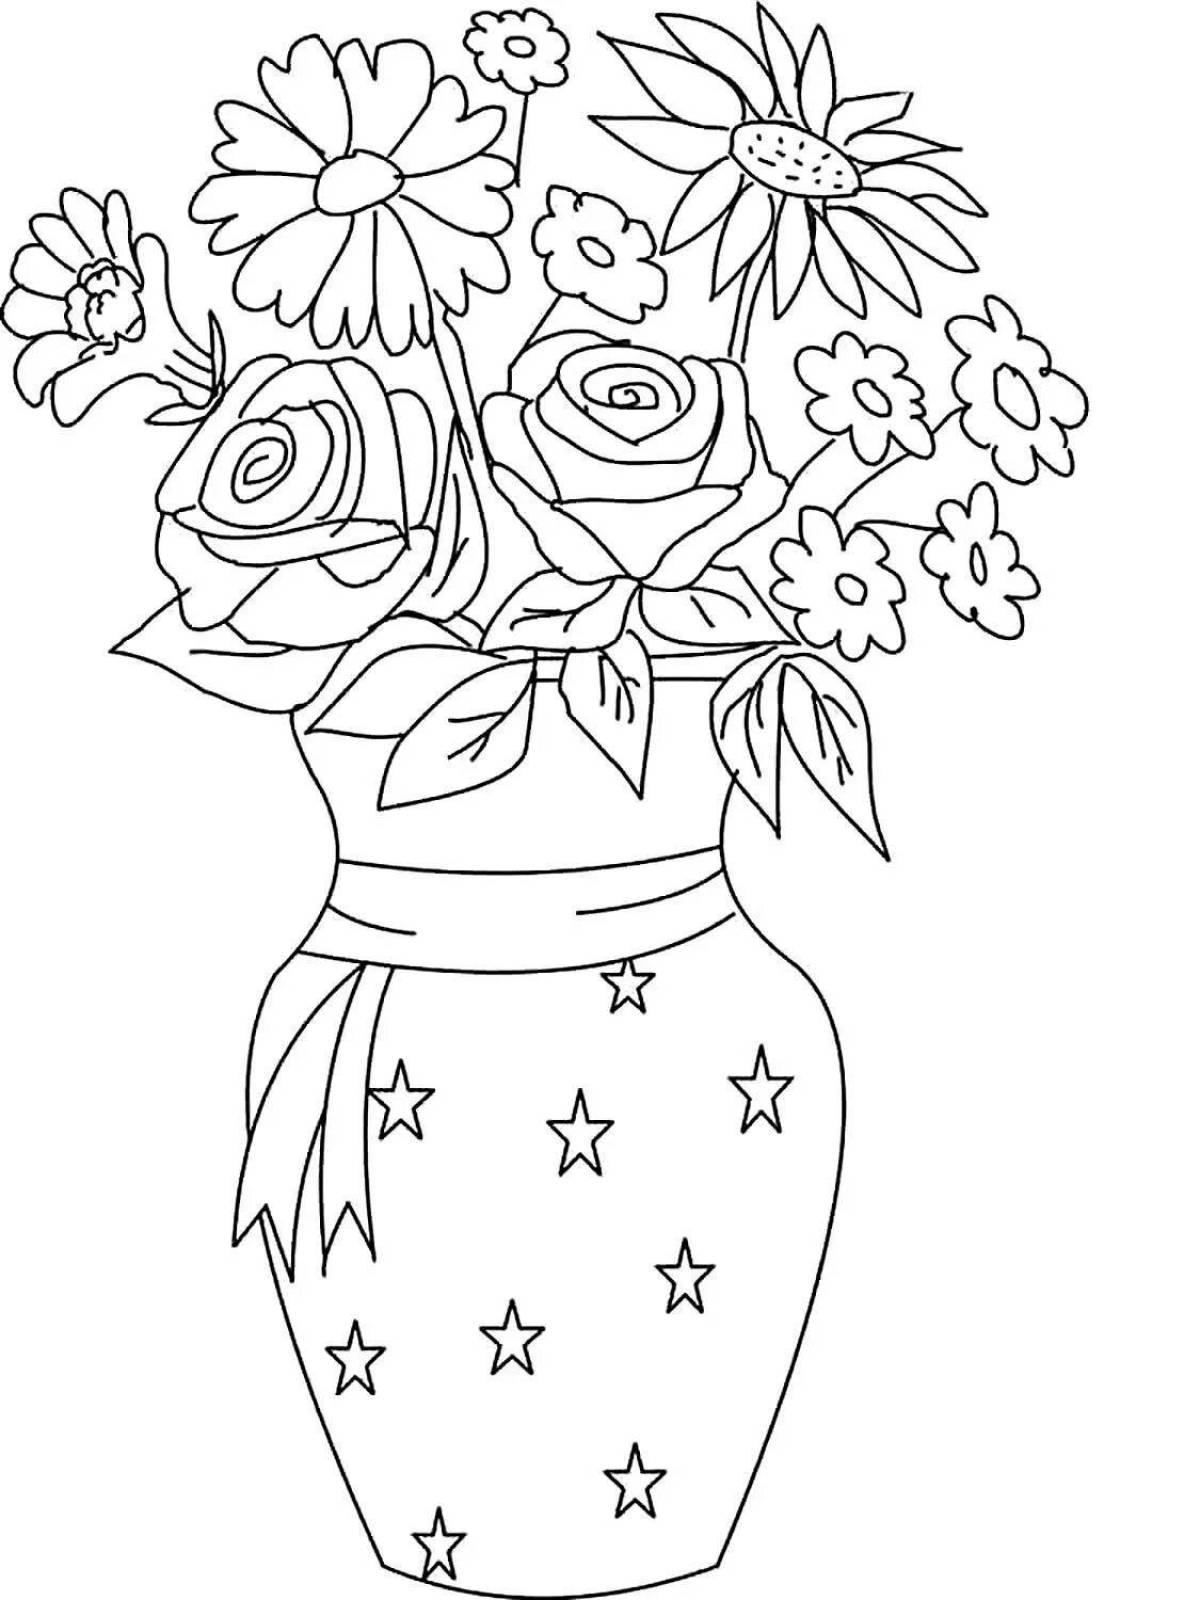 Coloring book bright colored vase with flowers